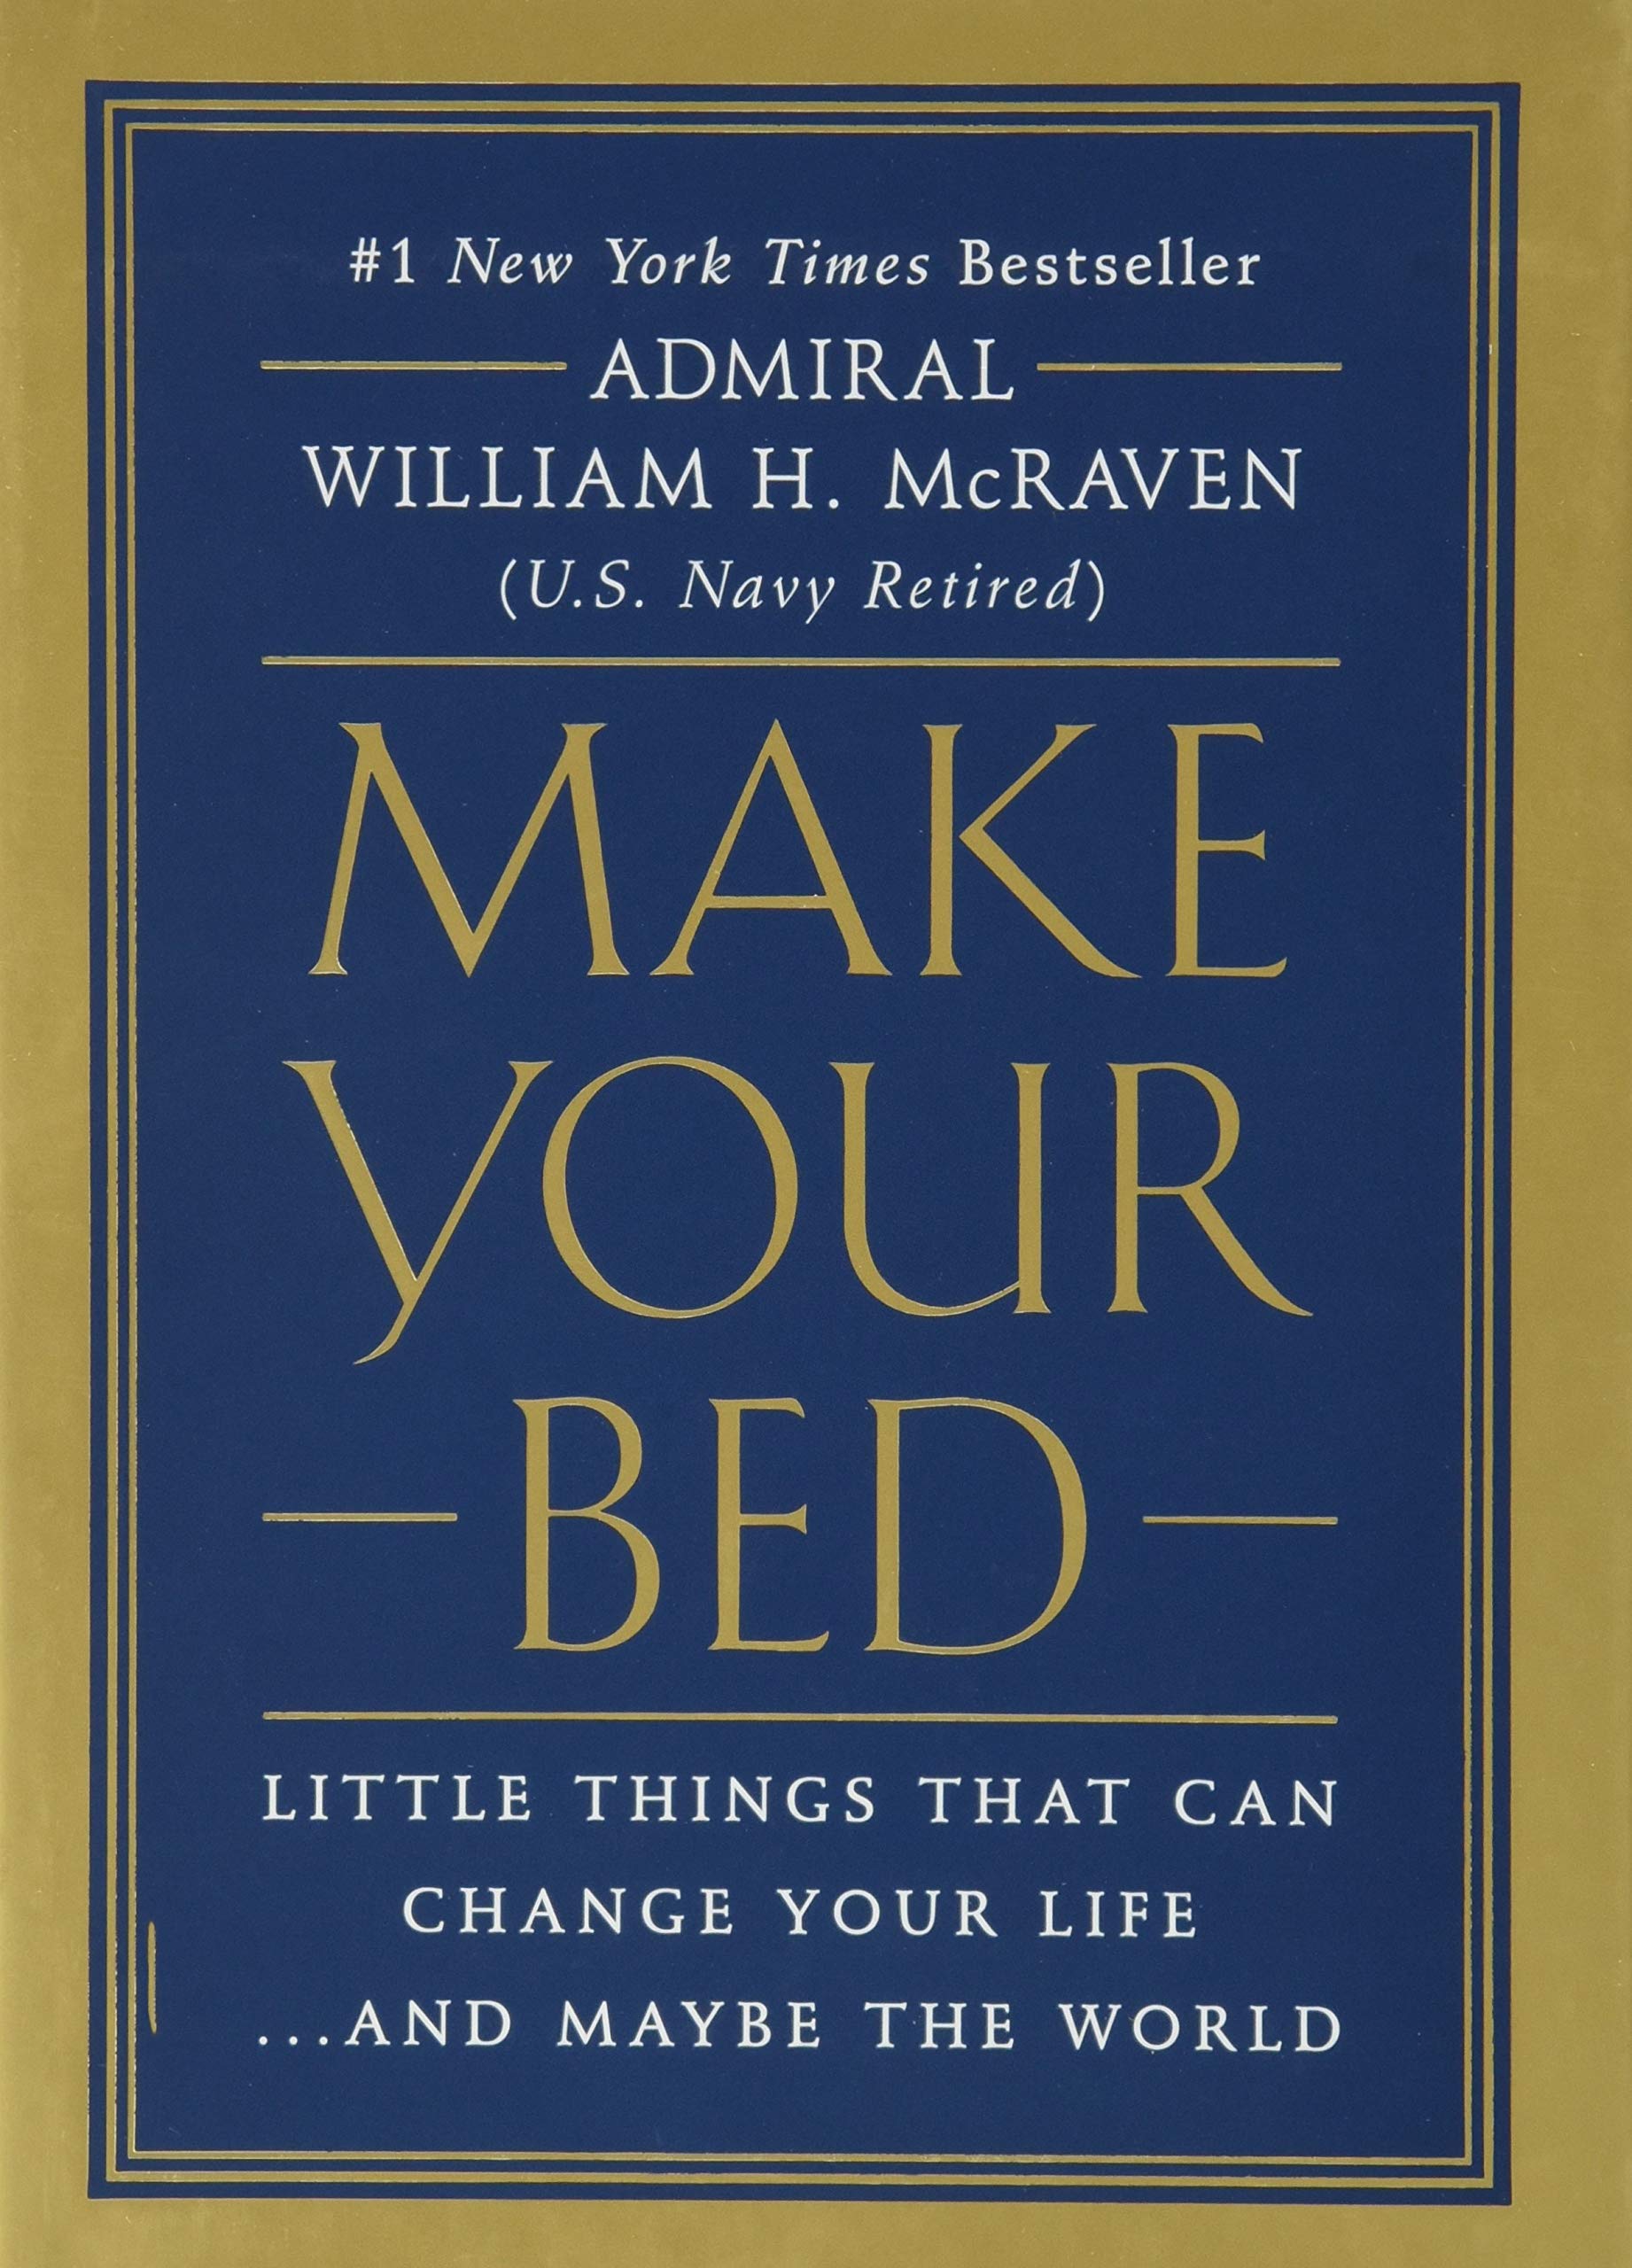 Make Your Bed: Little Things That Can Change Your Life...And Maybe the World Hardcover by Admiral William H. McRaven